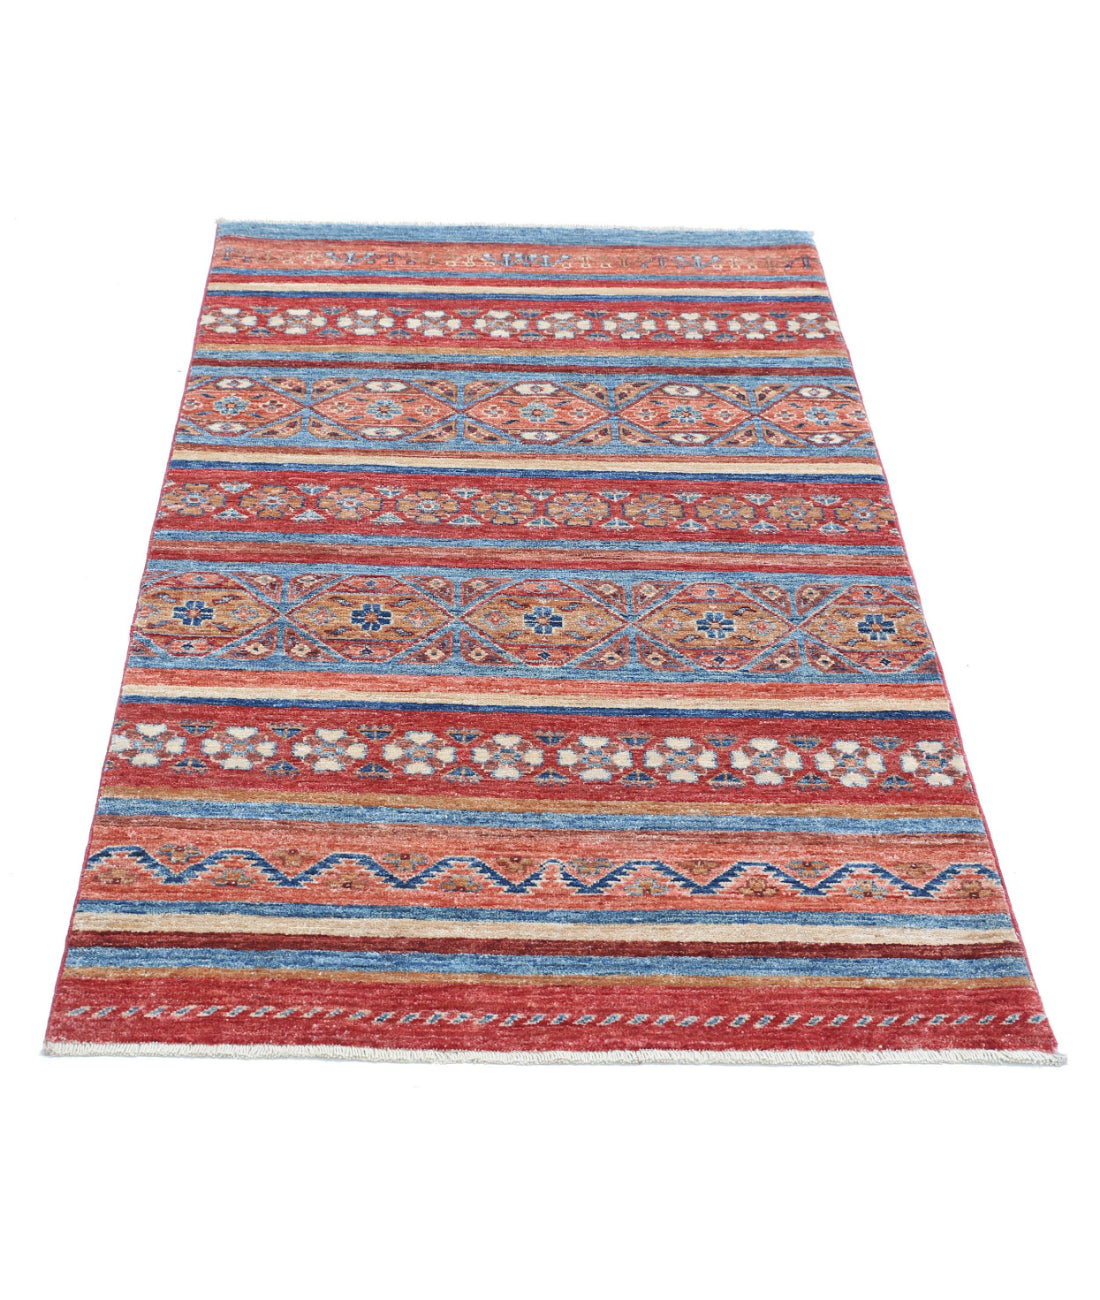 Hand Knotted Khurjeen Wool Rug - 2'11'' x 4'11'' 2'11'' x 4'11'' (88 X 148) / Multi / Multi